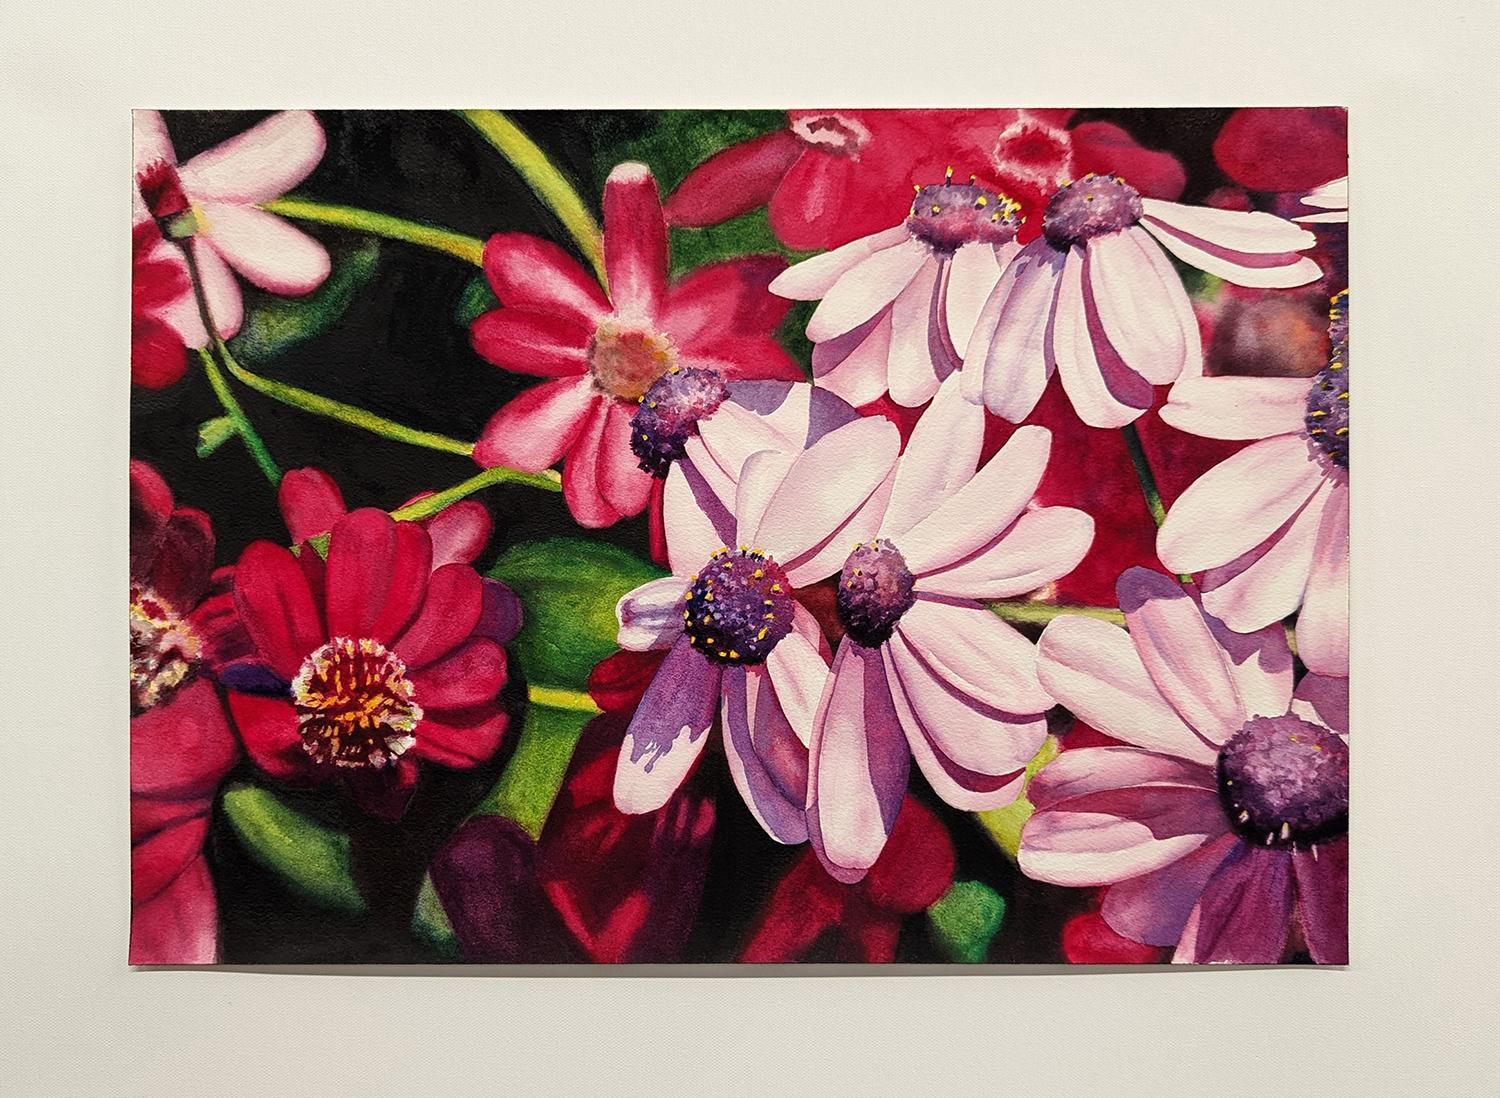 Mini Daisies in Many Pinks, Original Painting - American Realist Art by Jinny Tomozy